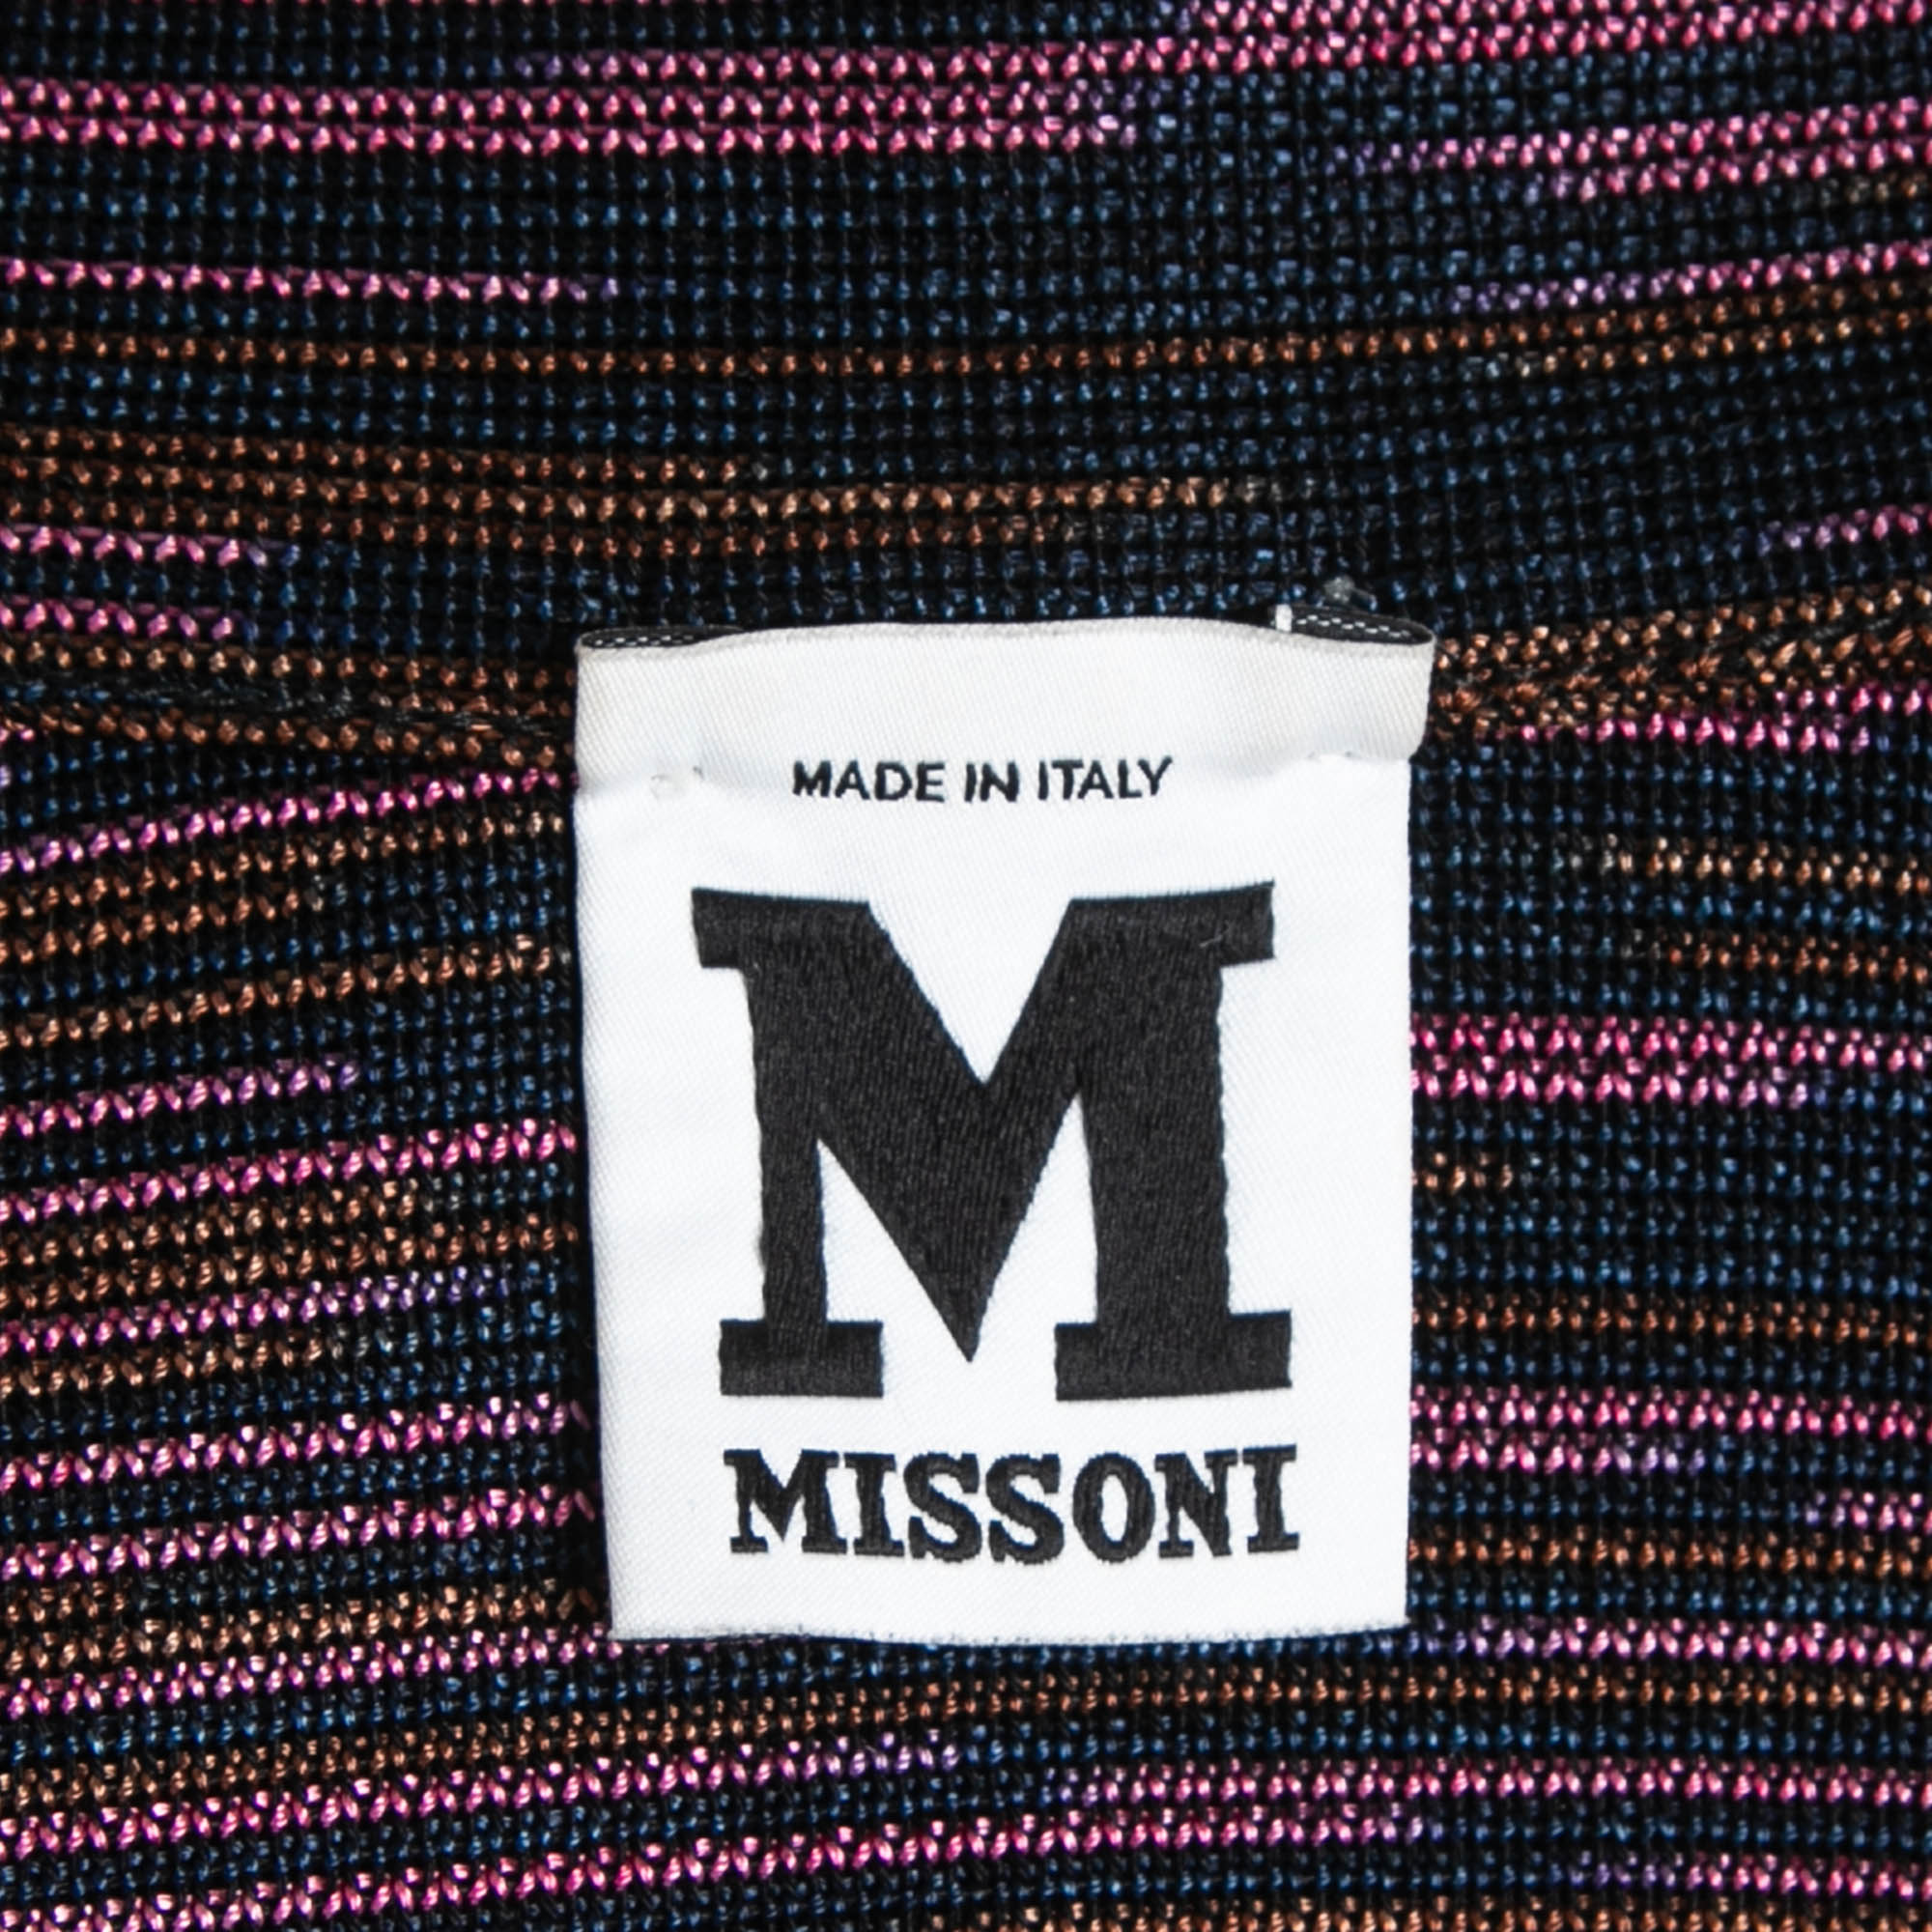 M Missoni Multicolor Patterned Knit Single Breasted Blazer S